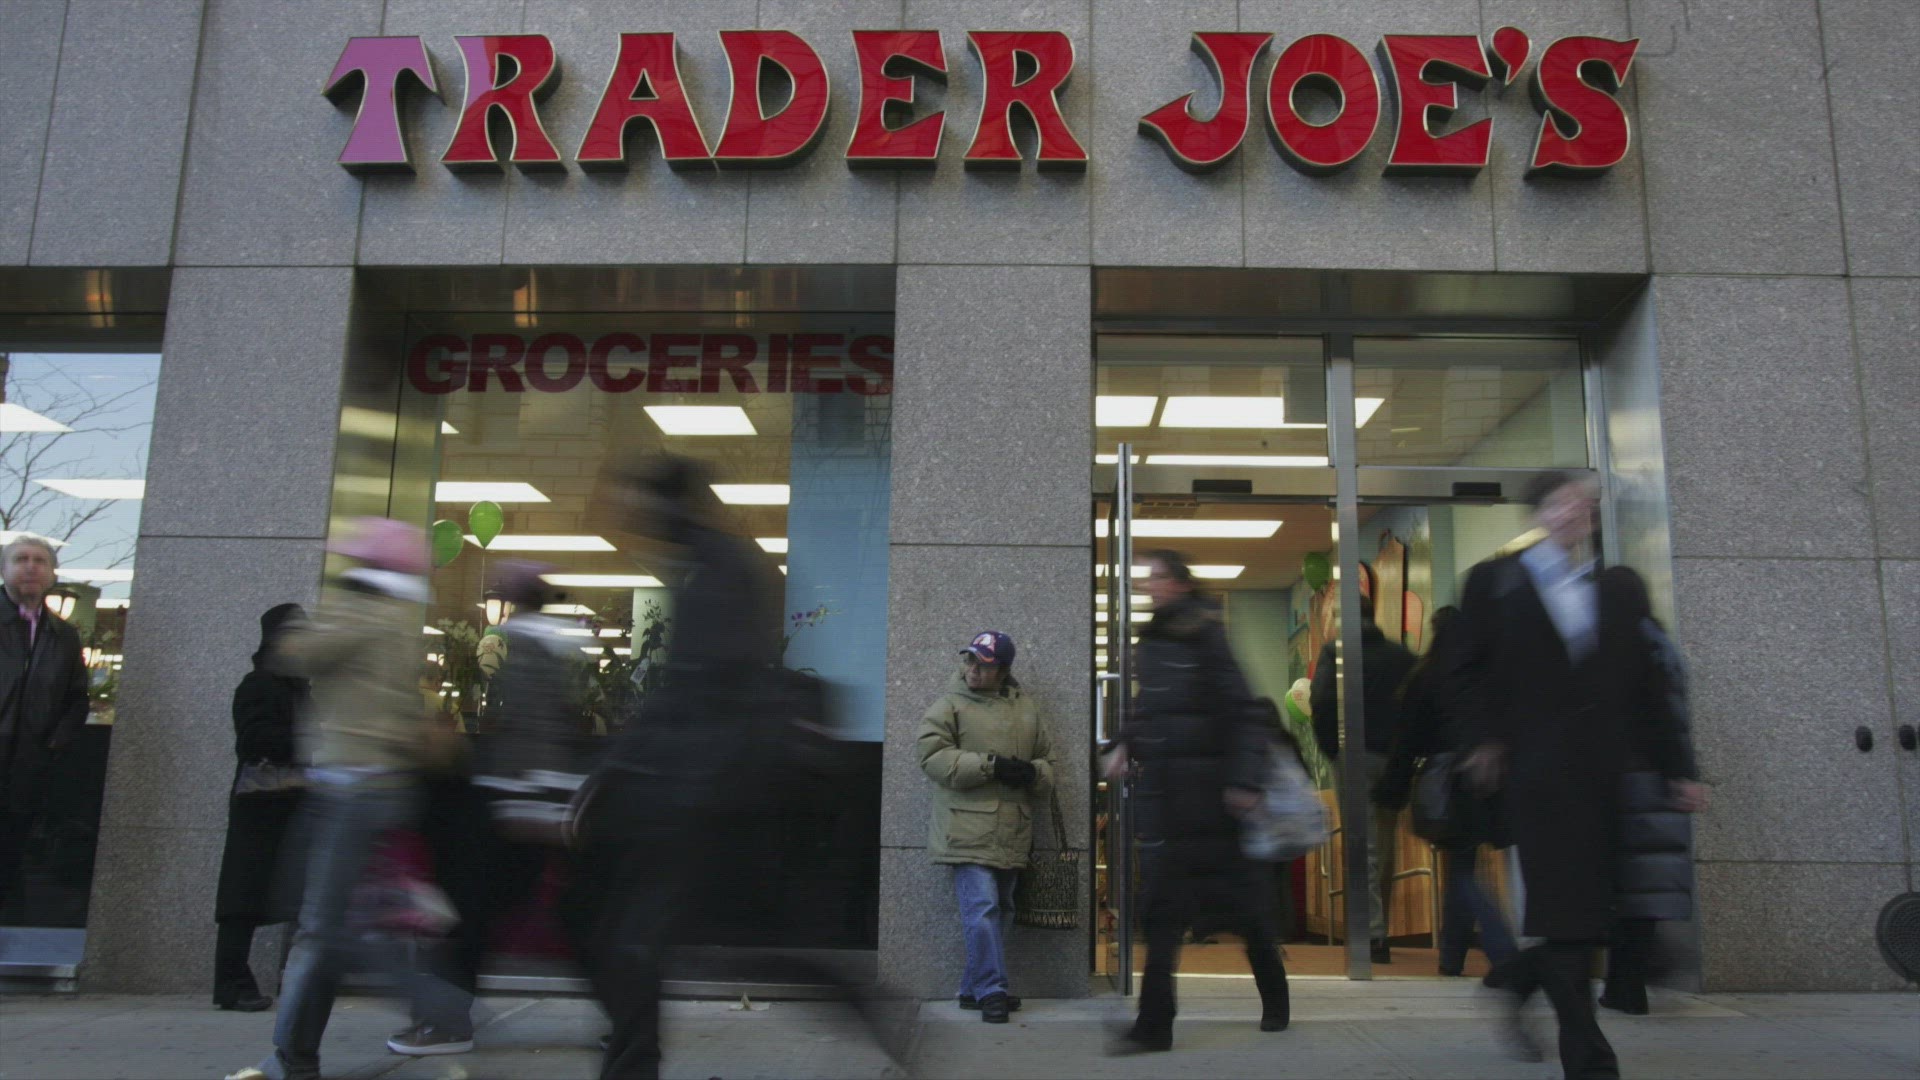 If your favorite grocery store is Trader Joe's, listen up! Employees have revealed some gripes they have with customers! Buzz60's Mercer Morrison has the story.